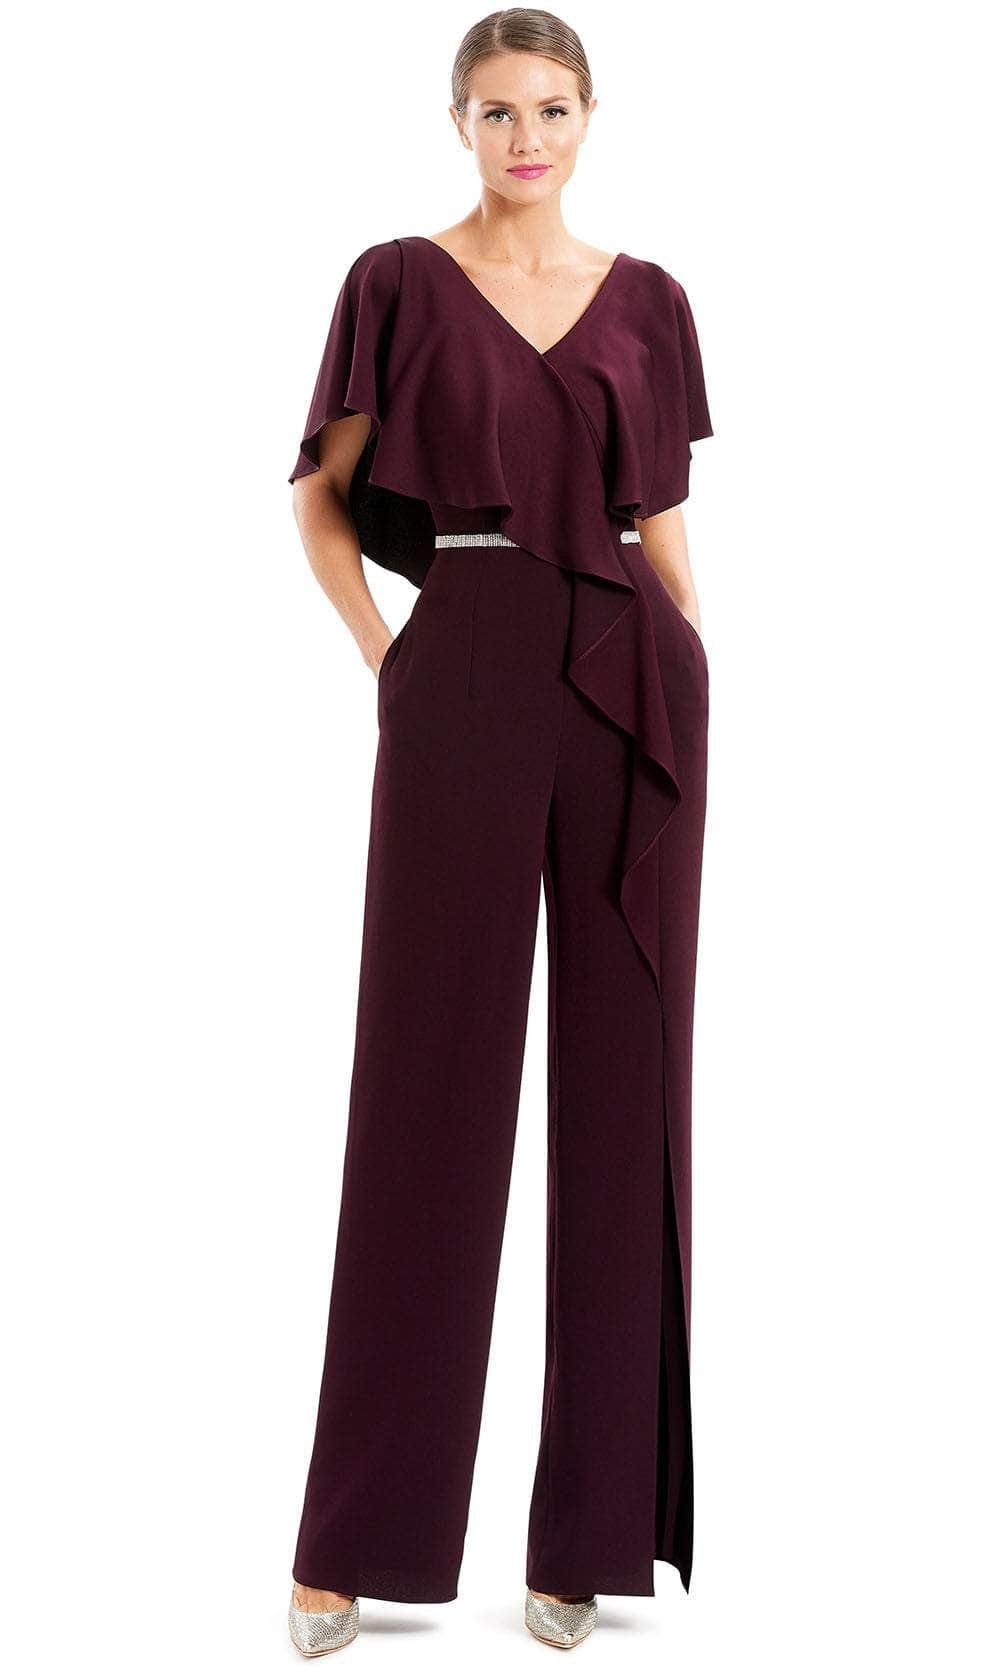 Image of Alexander by Daymor 1669 - Ruffled Short Sleeve Formal Jumpsuit